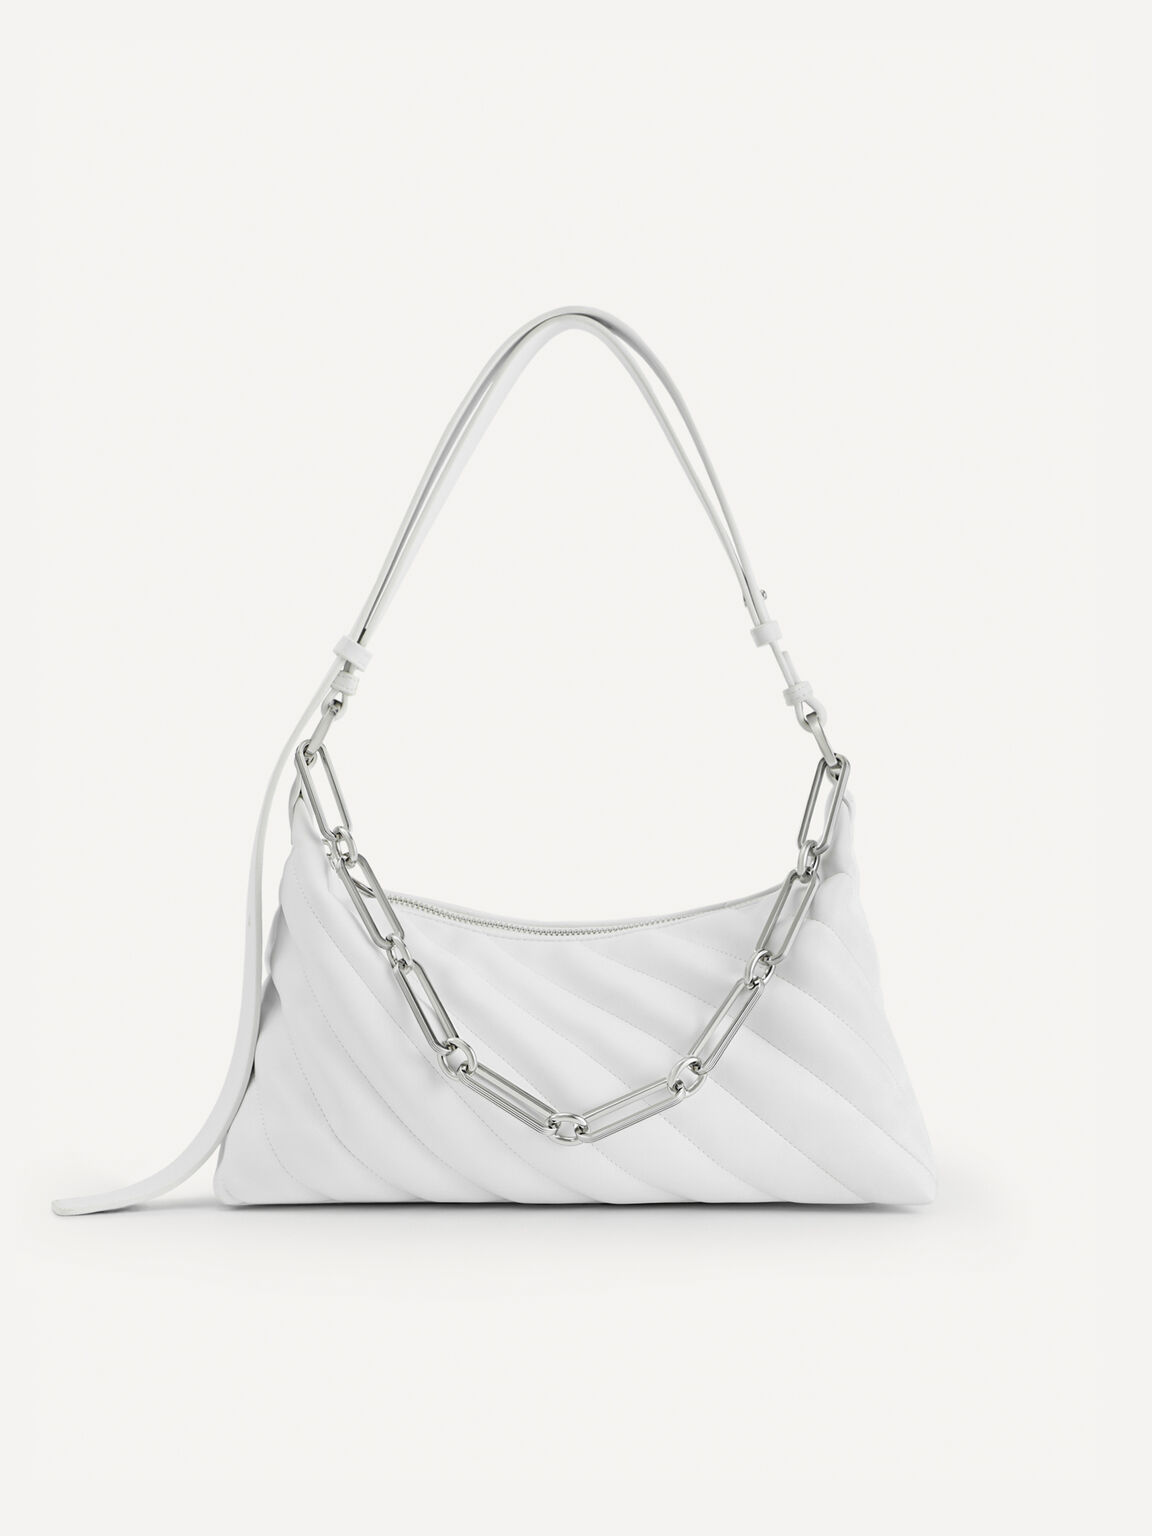 Quilted Shoulder Bag with Chain Strap, White